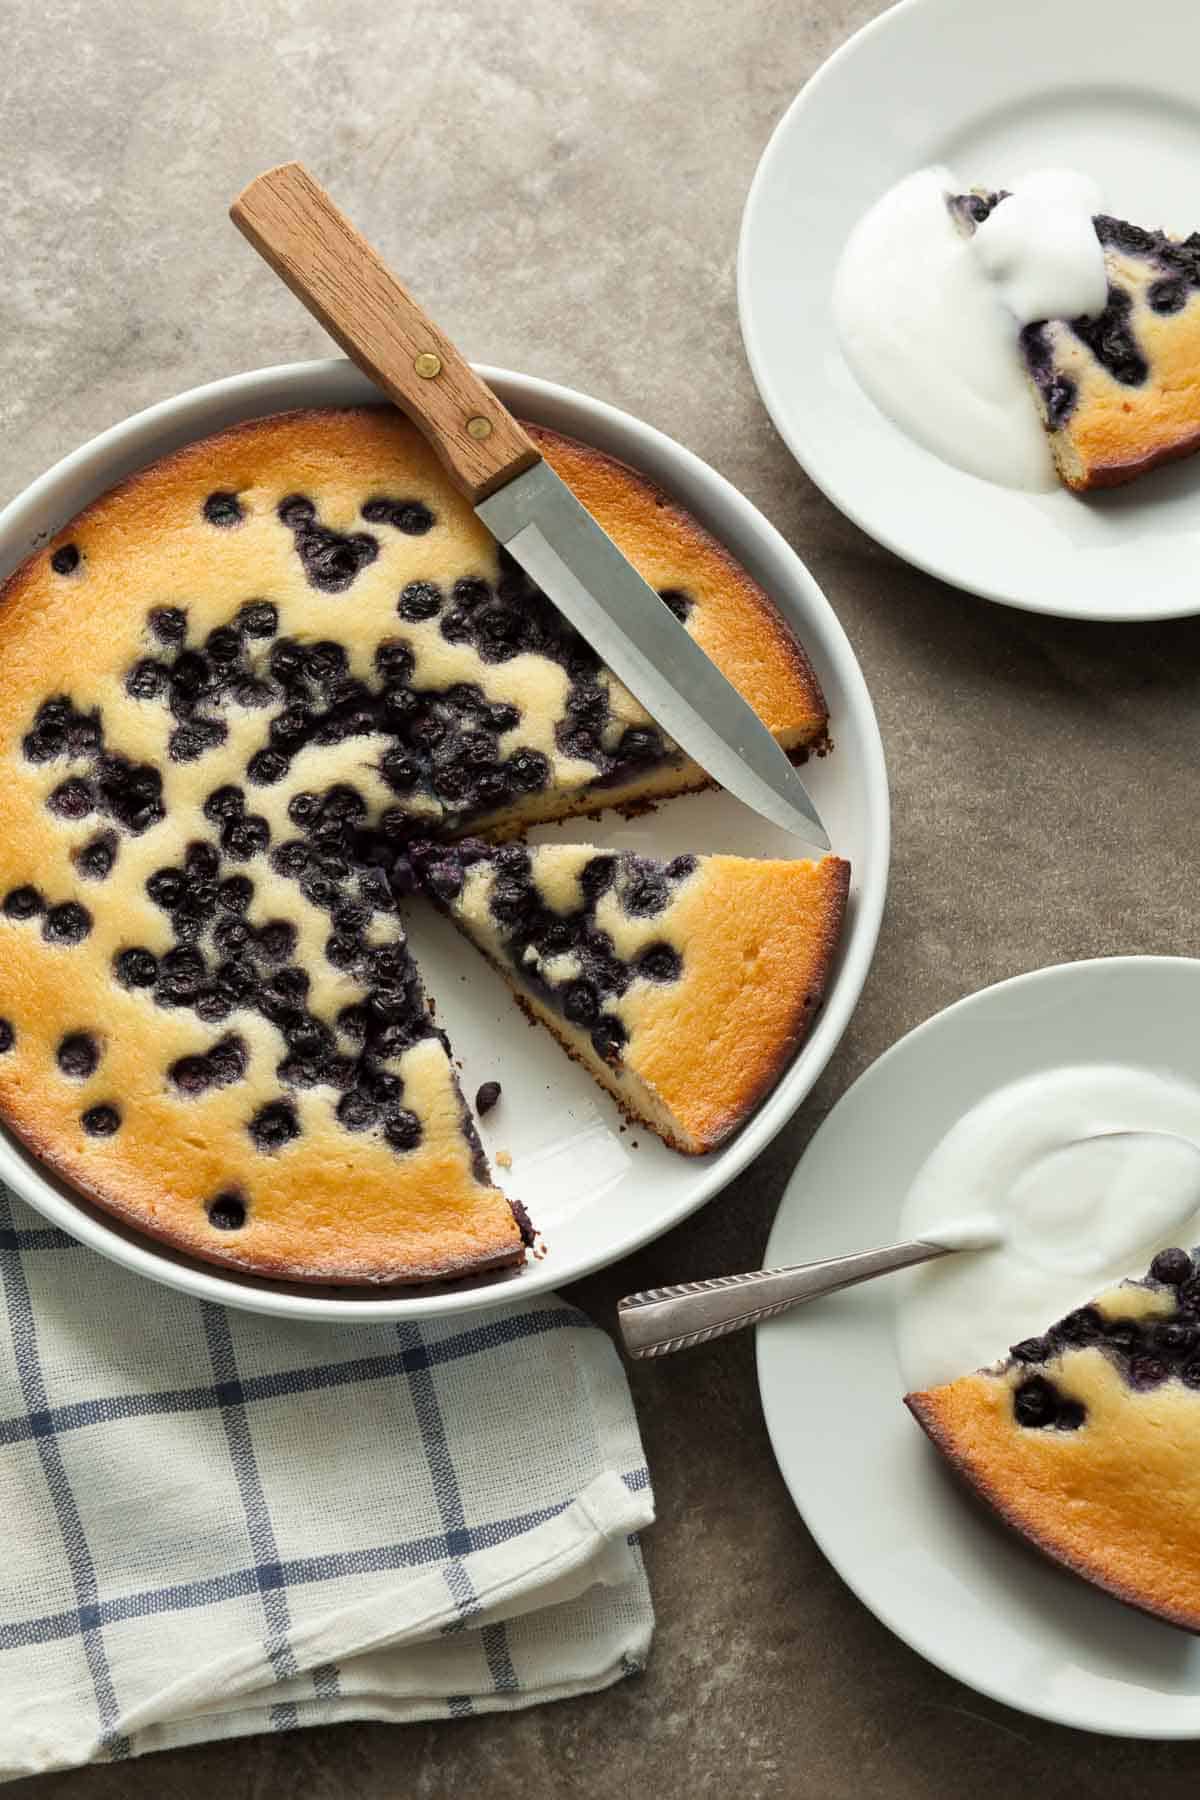 Baked Blueberry Pancake with Knife